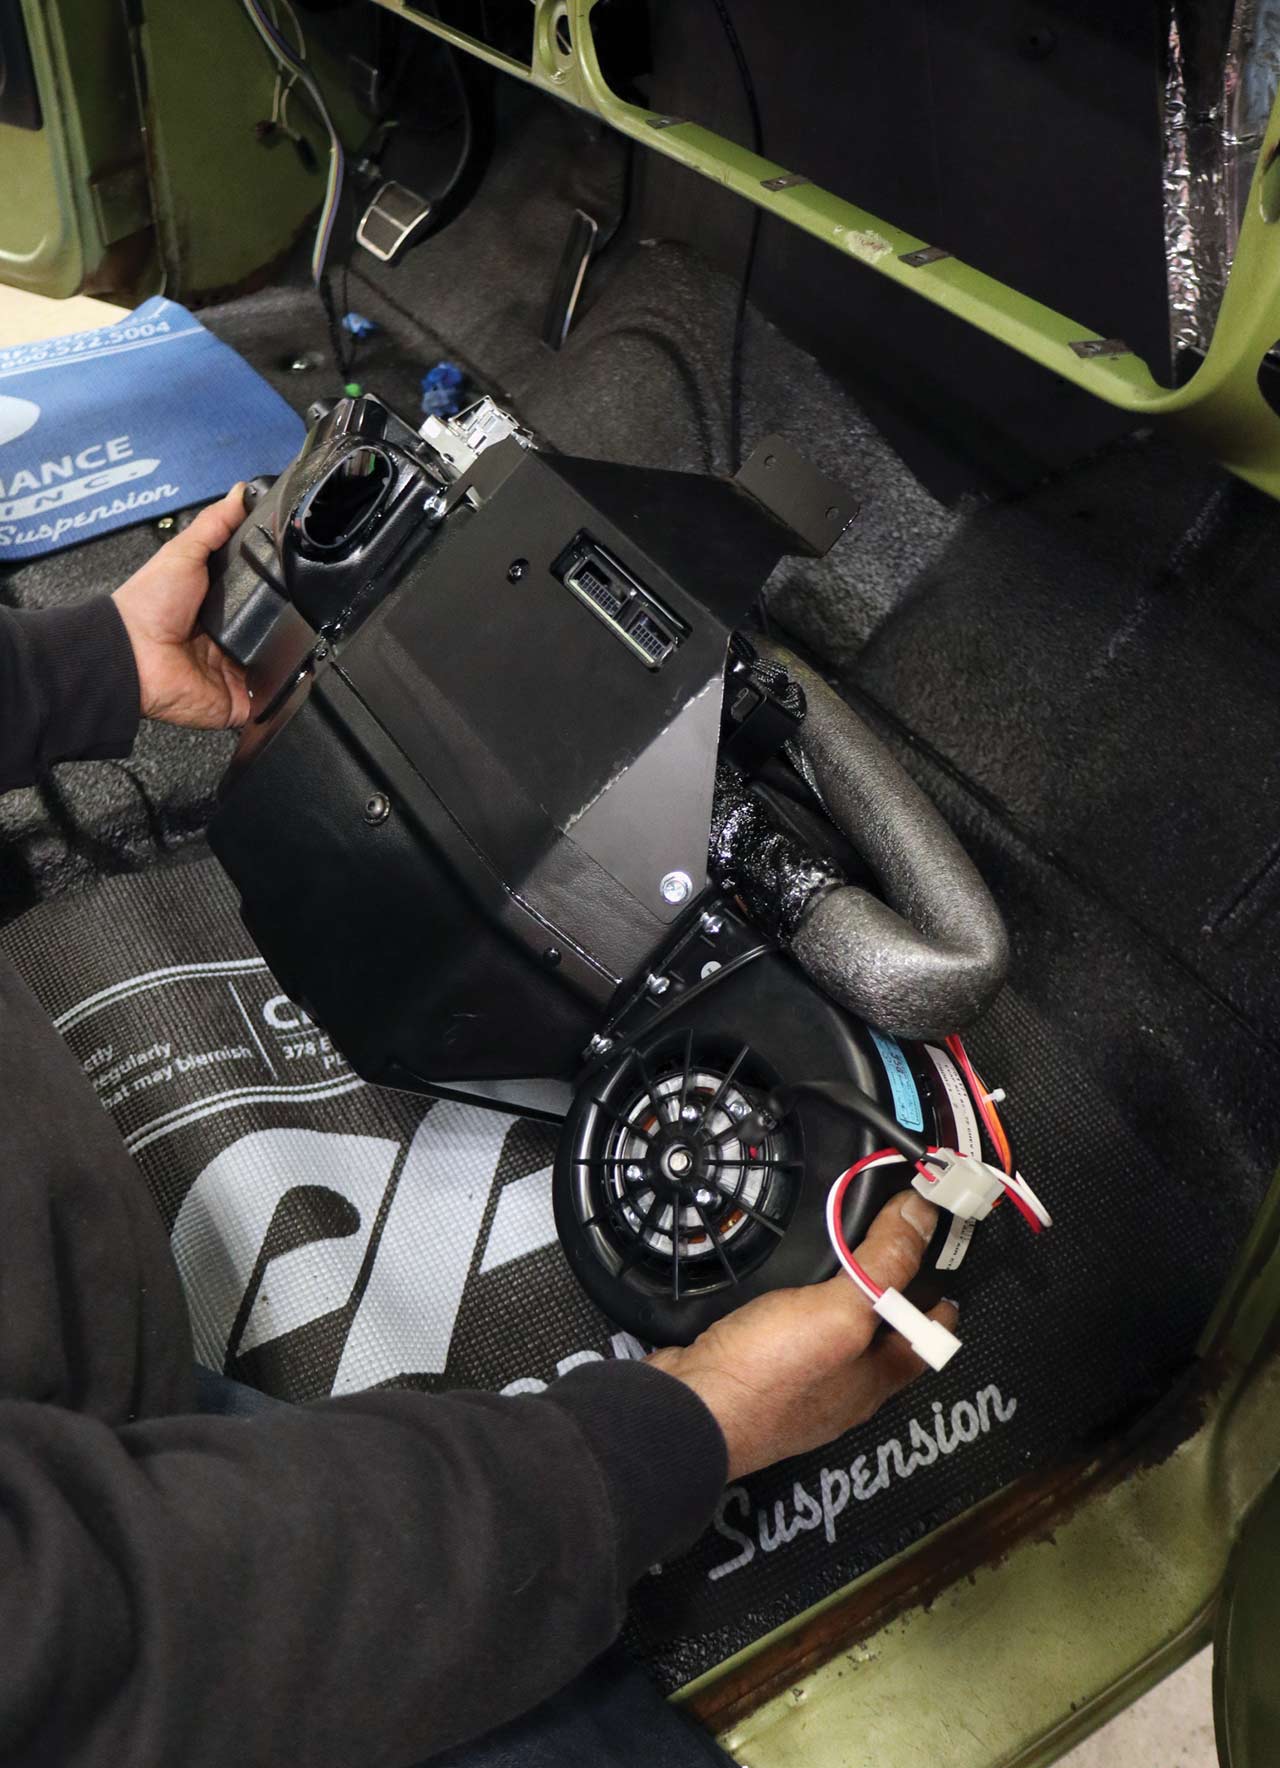 The Gen IV was mounted up under the dash using the pre-installed bracket